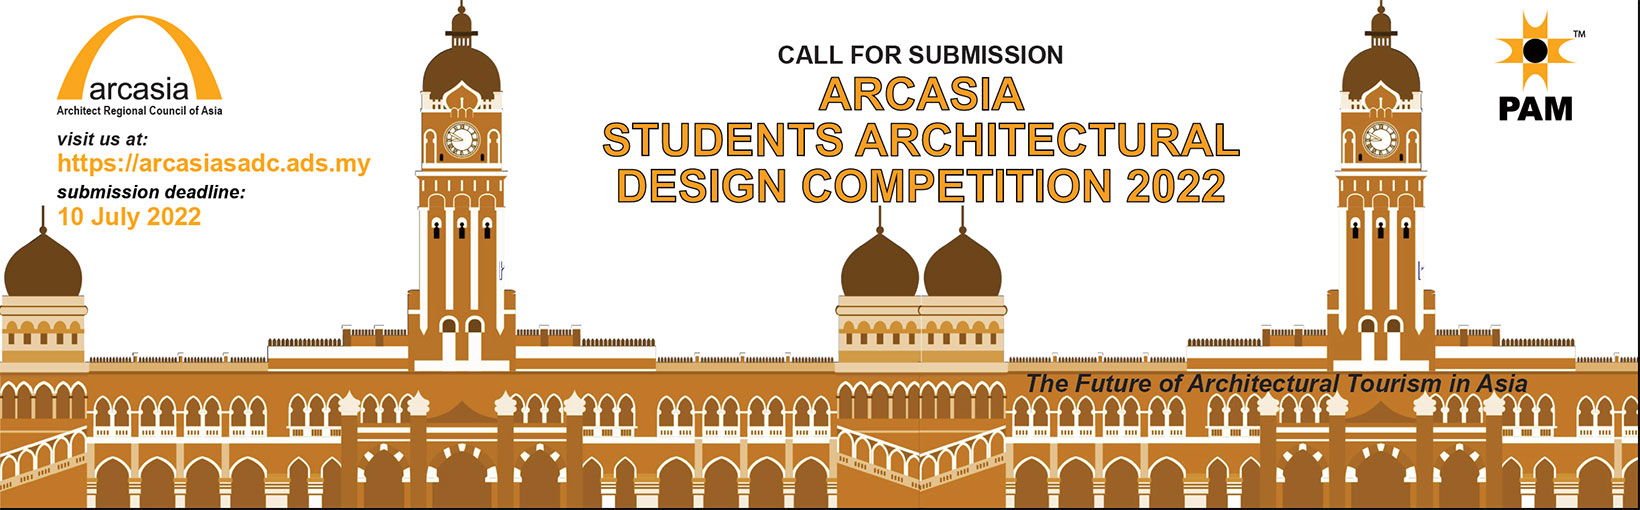 ARCASIA Students Architectural Design Competition 2022